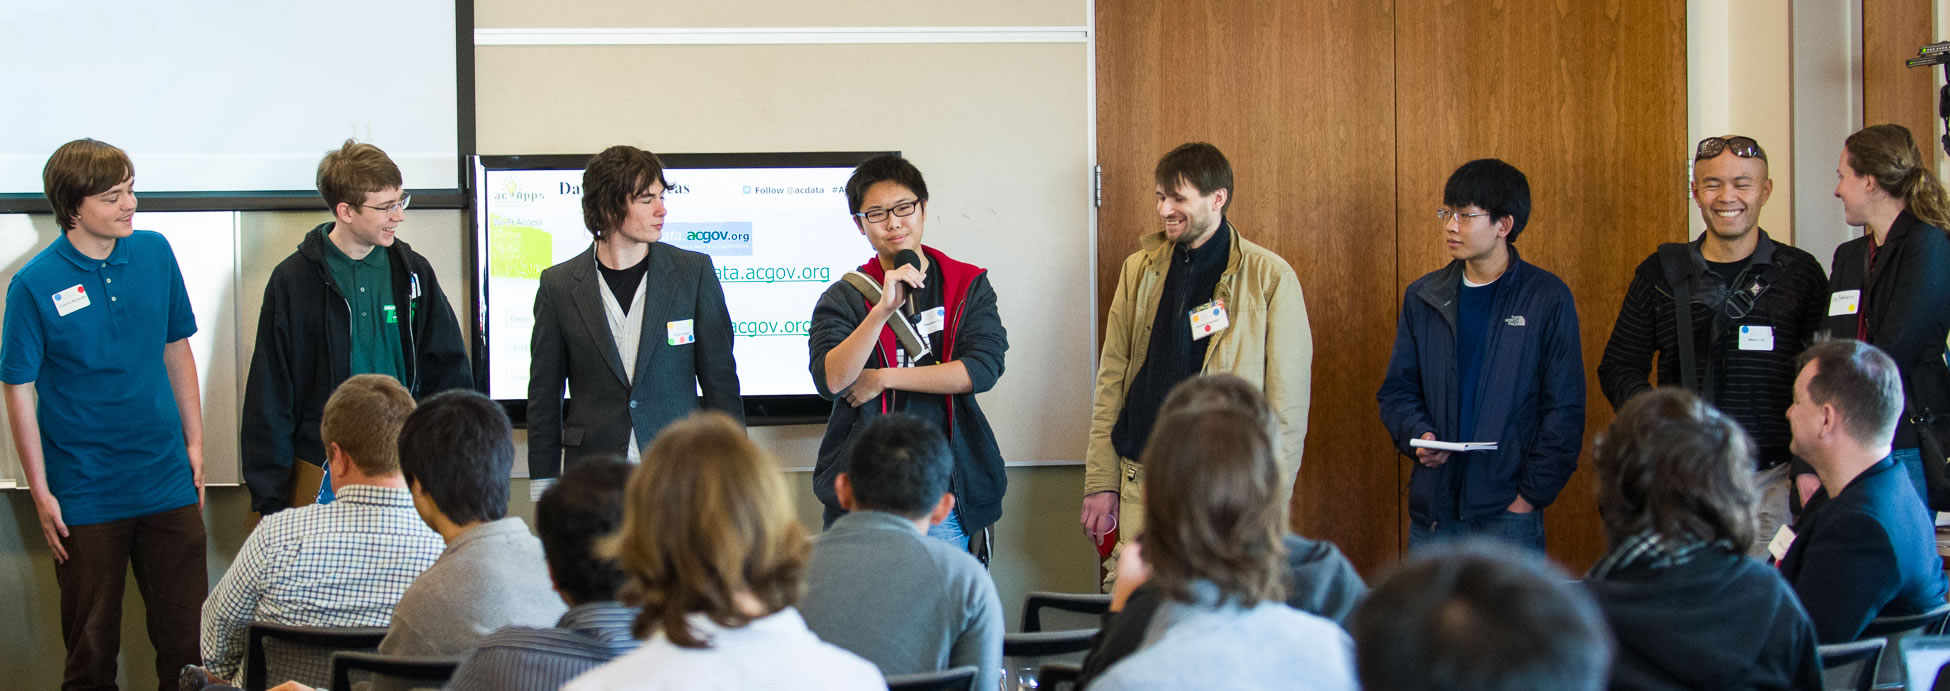 Photo of hackathon participants pitching their app ideas.